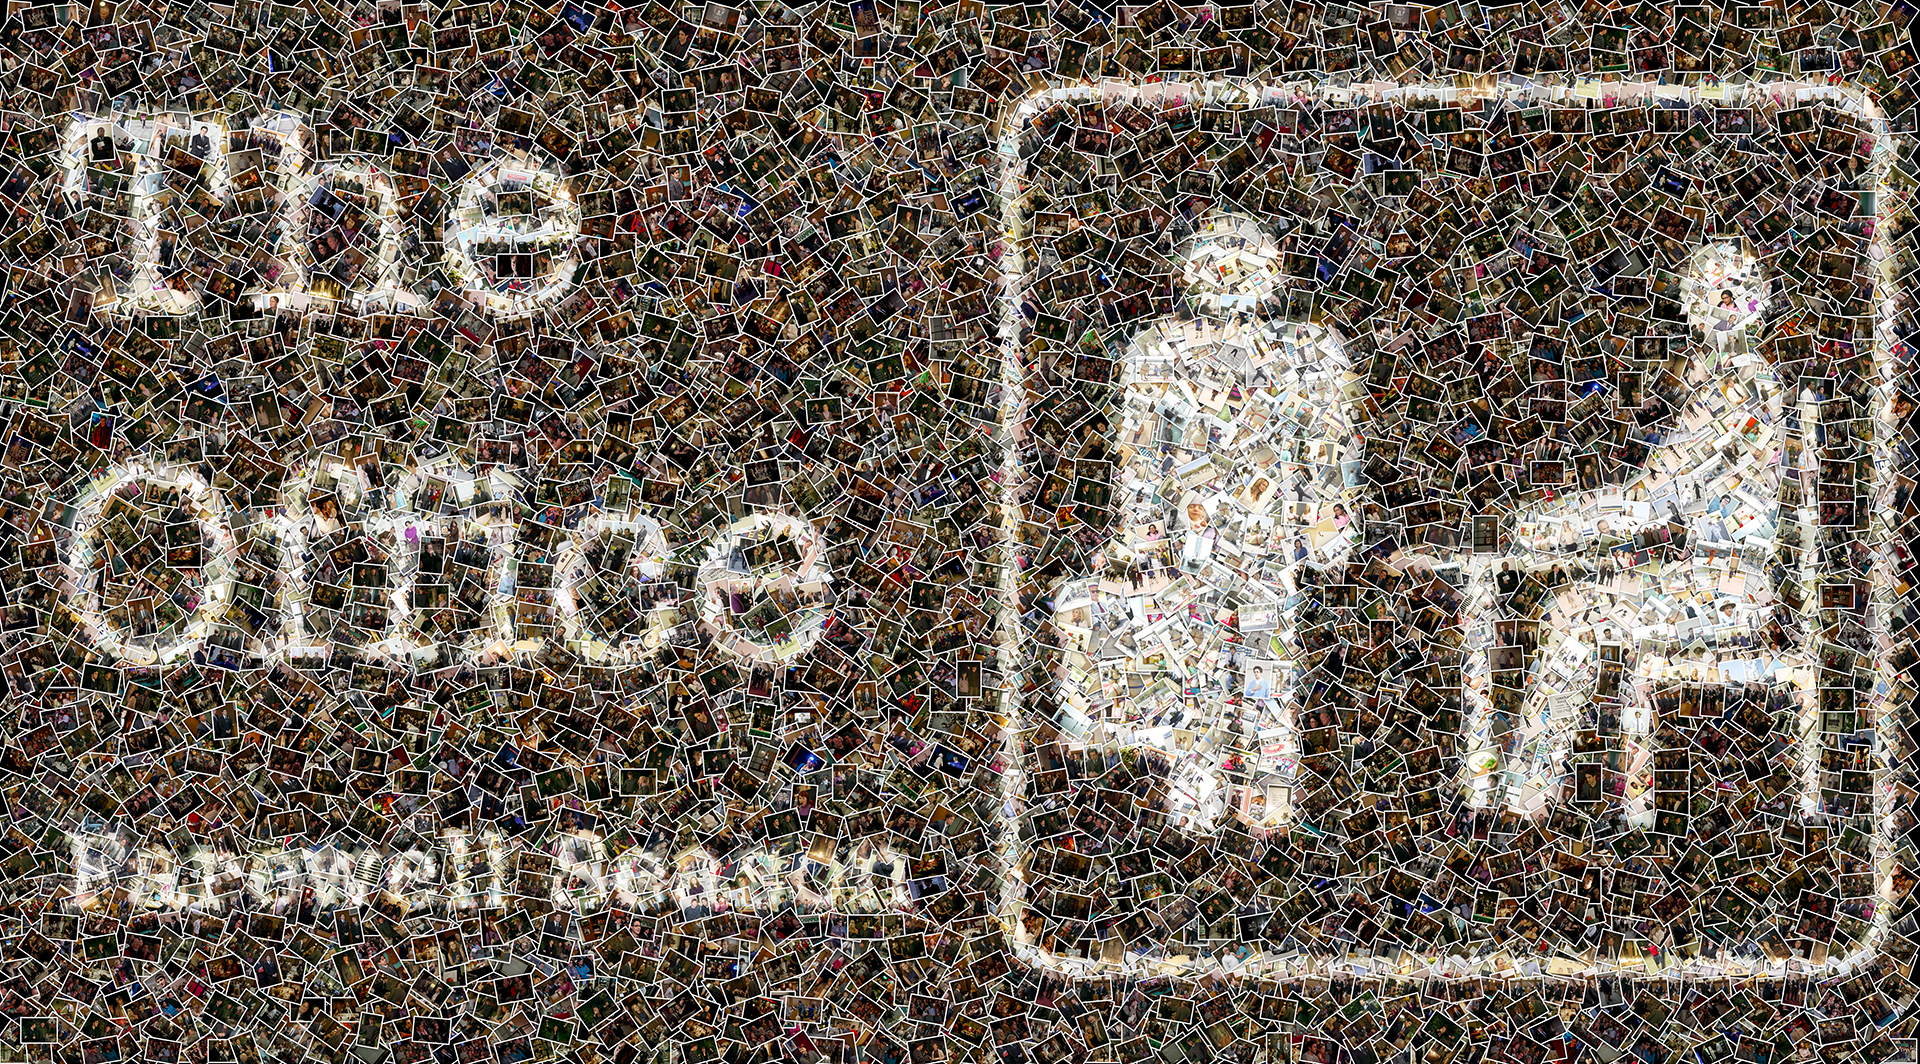 photo mosaic over 4600 stills from NBC's The Office were used to create this farewell season mural